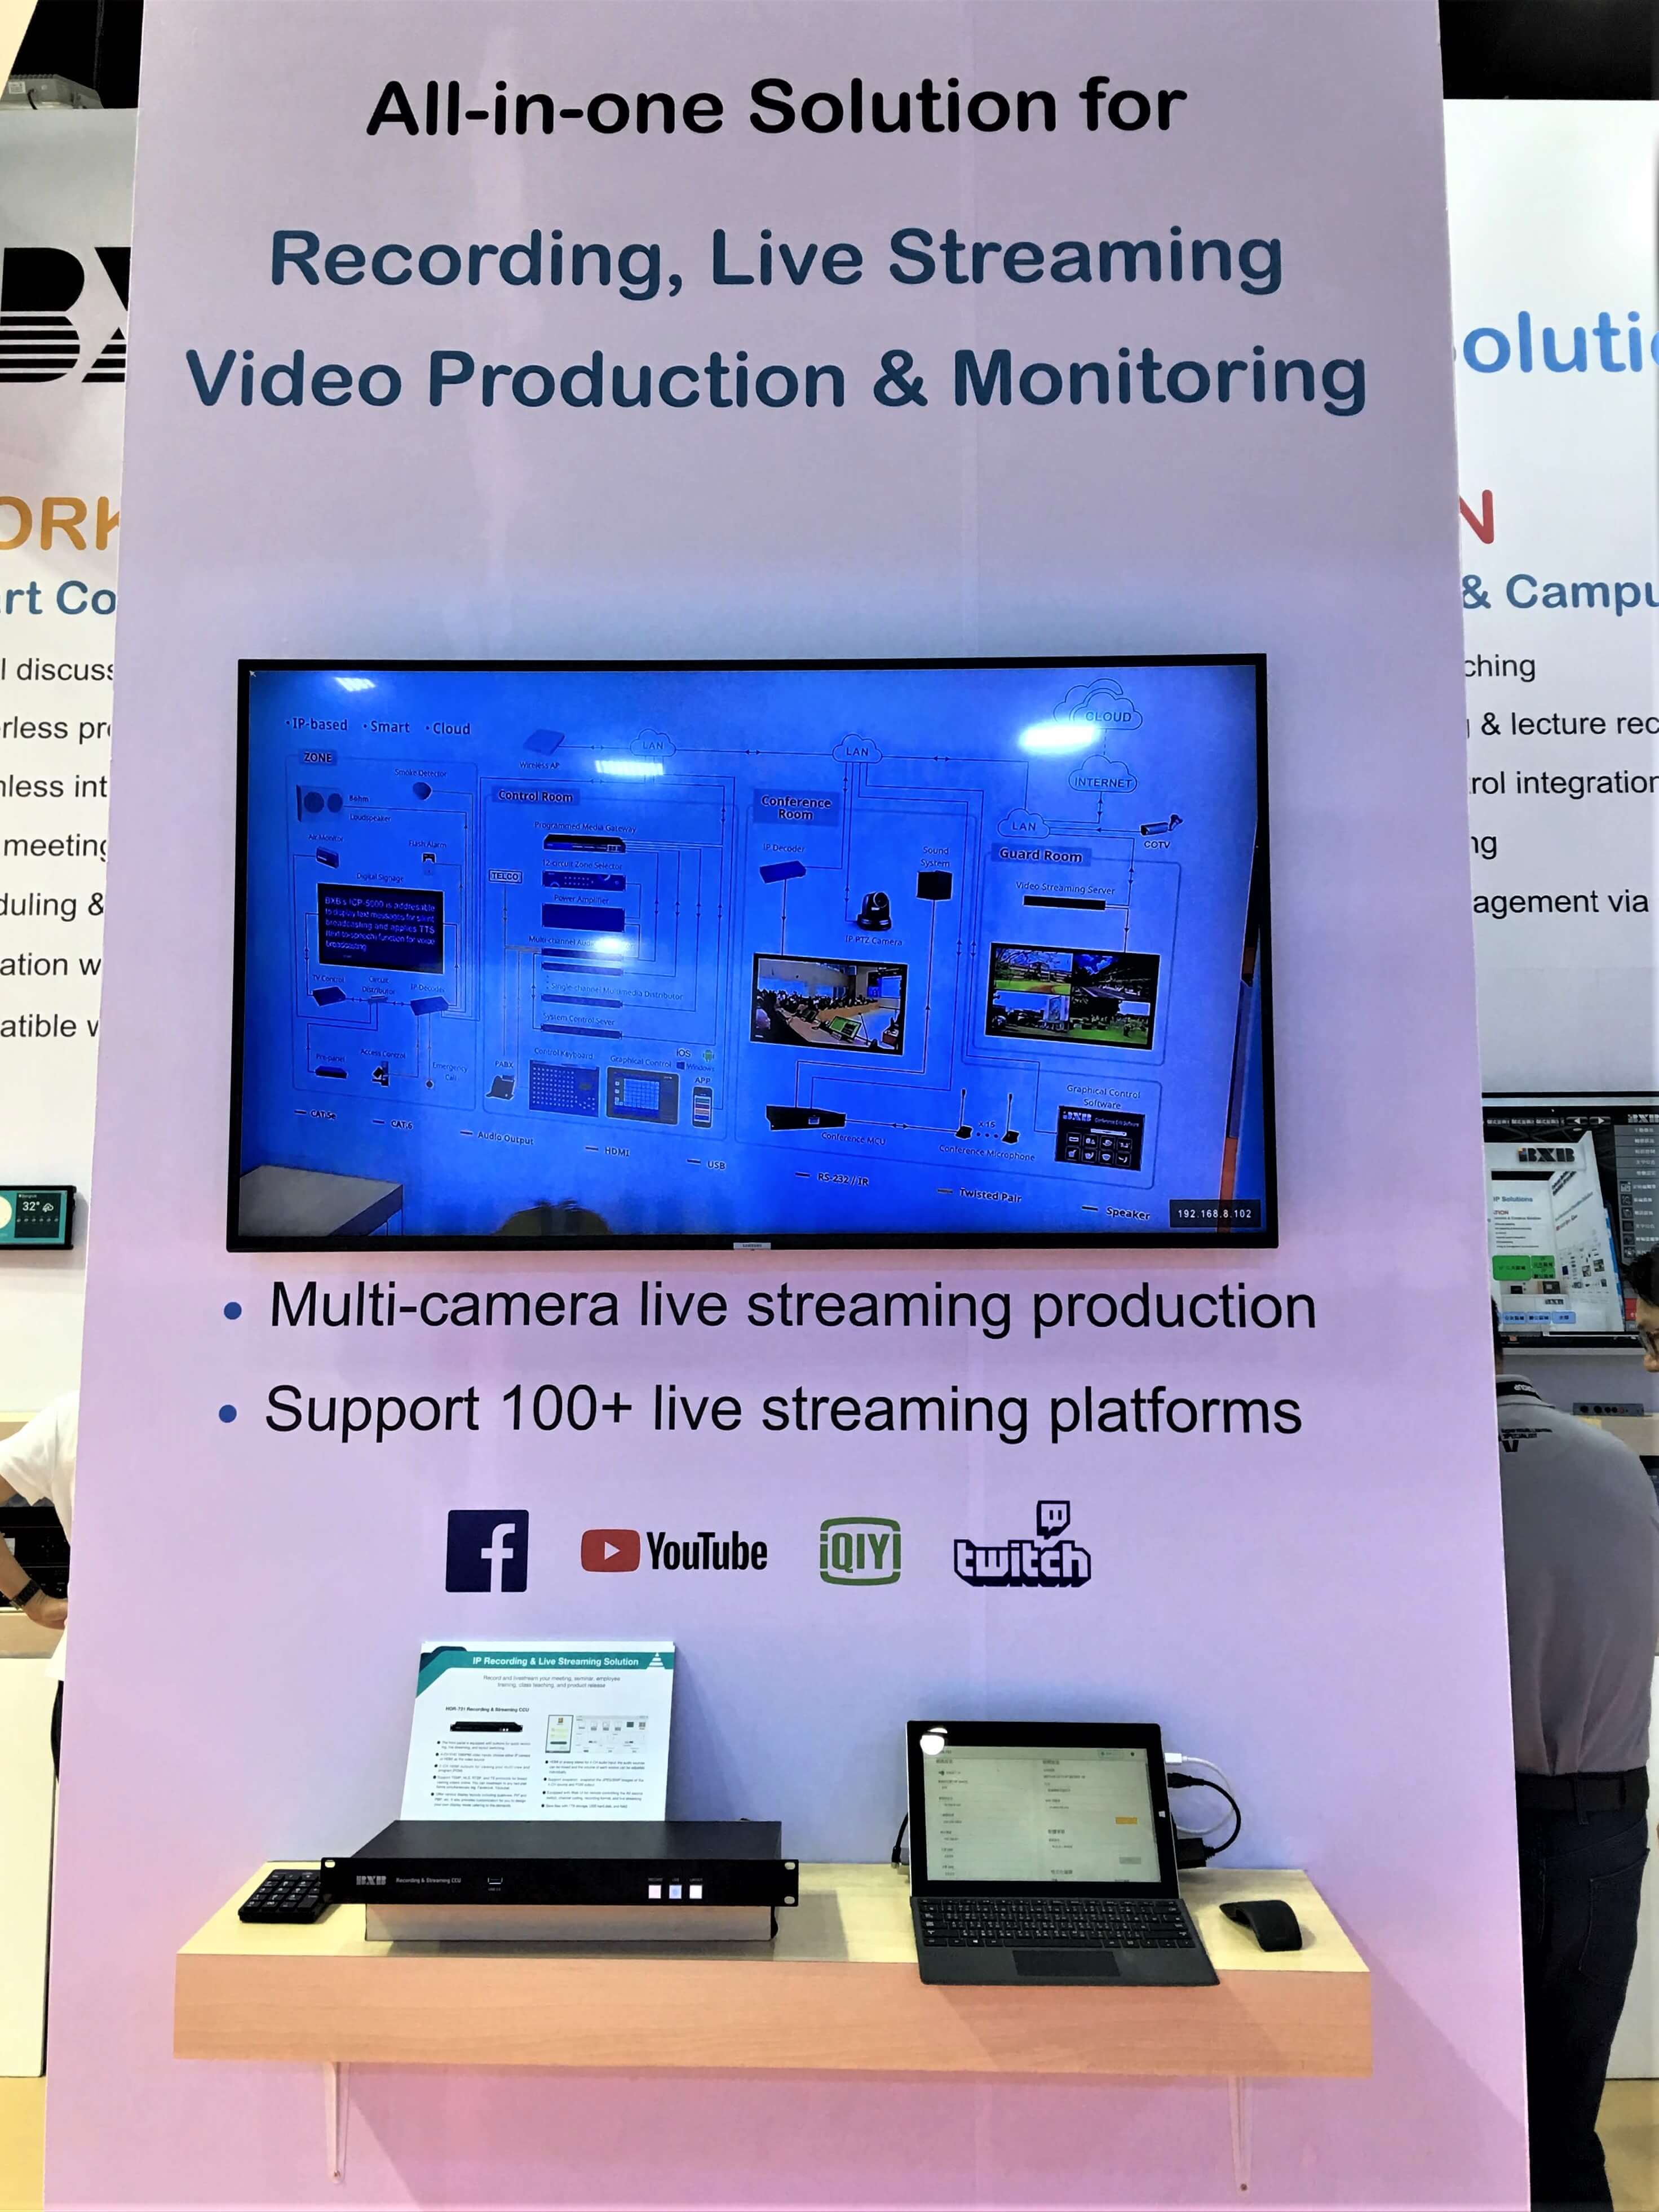 all-in-one solution, recording, livestreaming, video monitoring, HDR-731